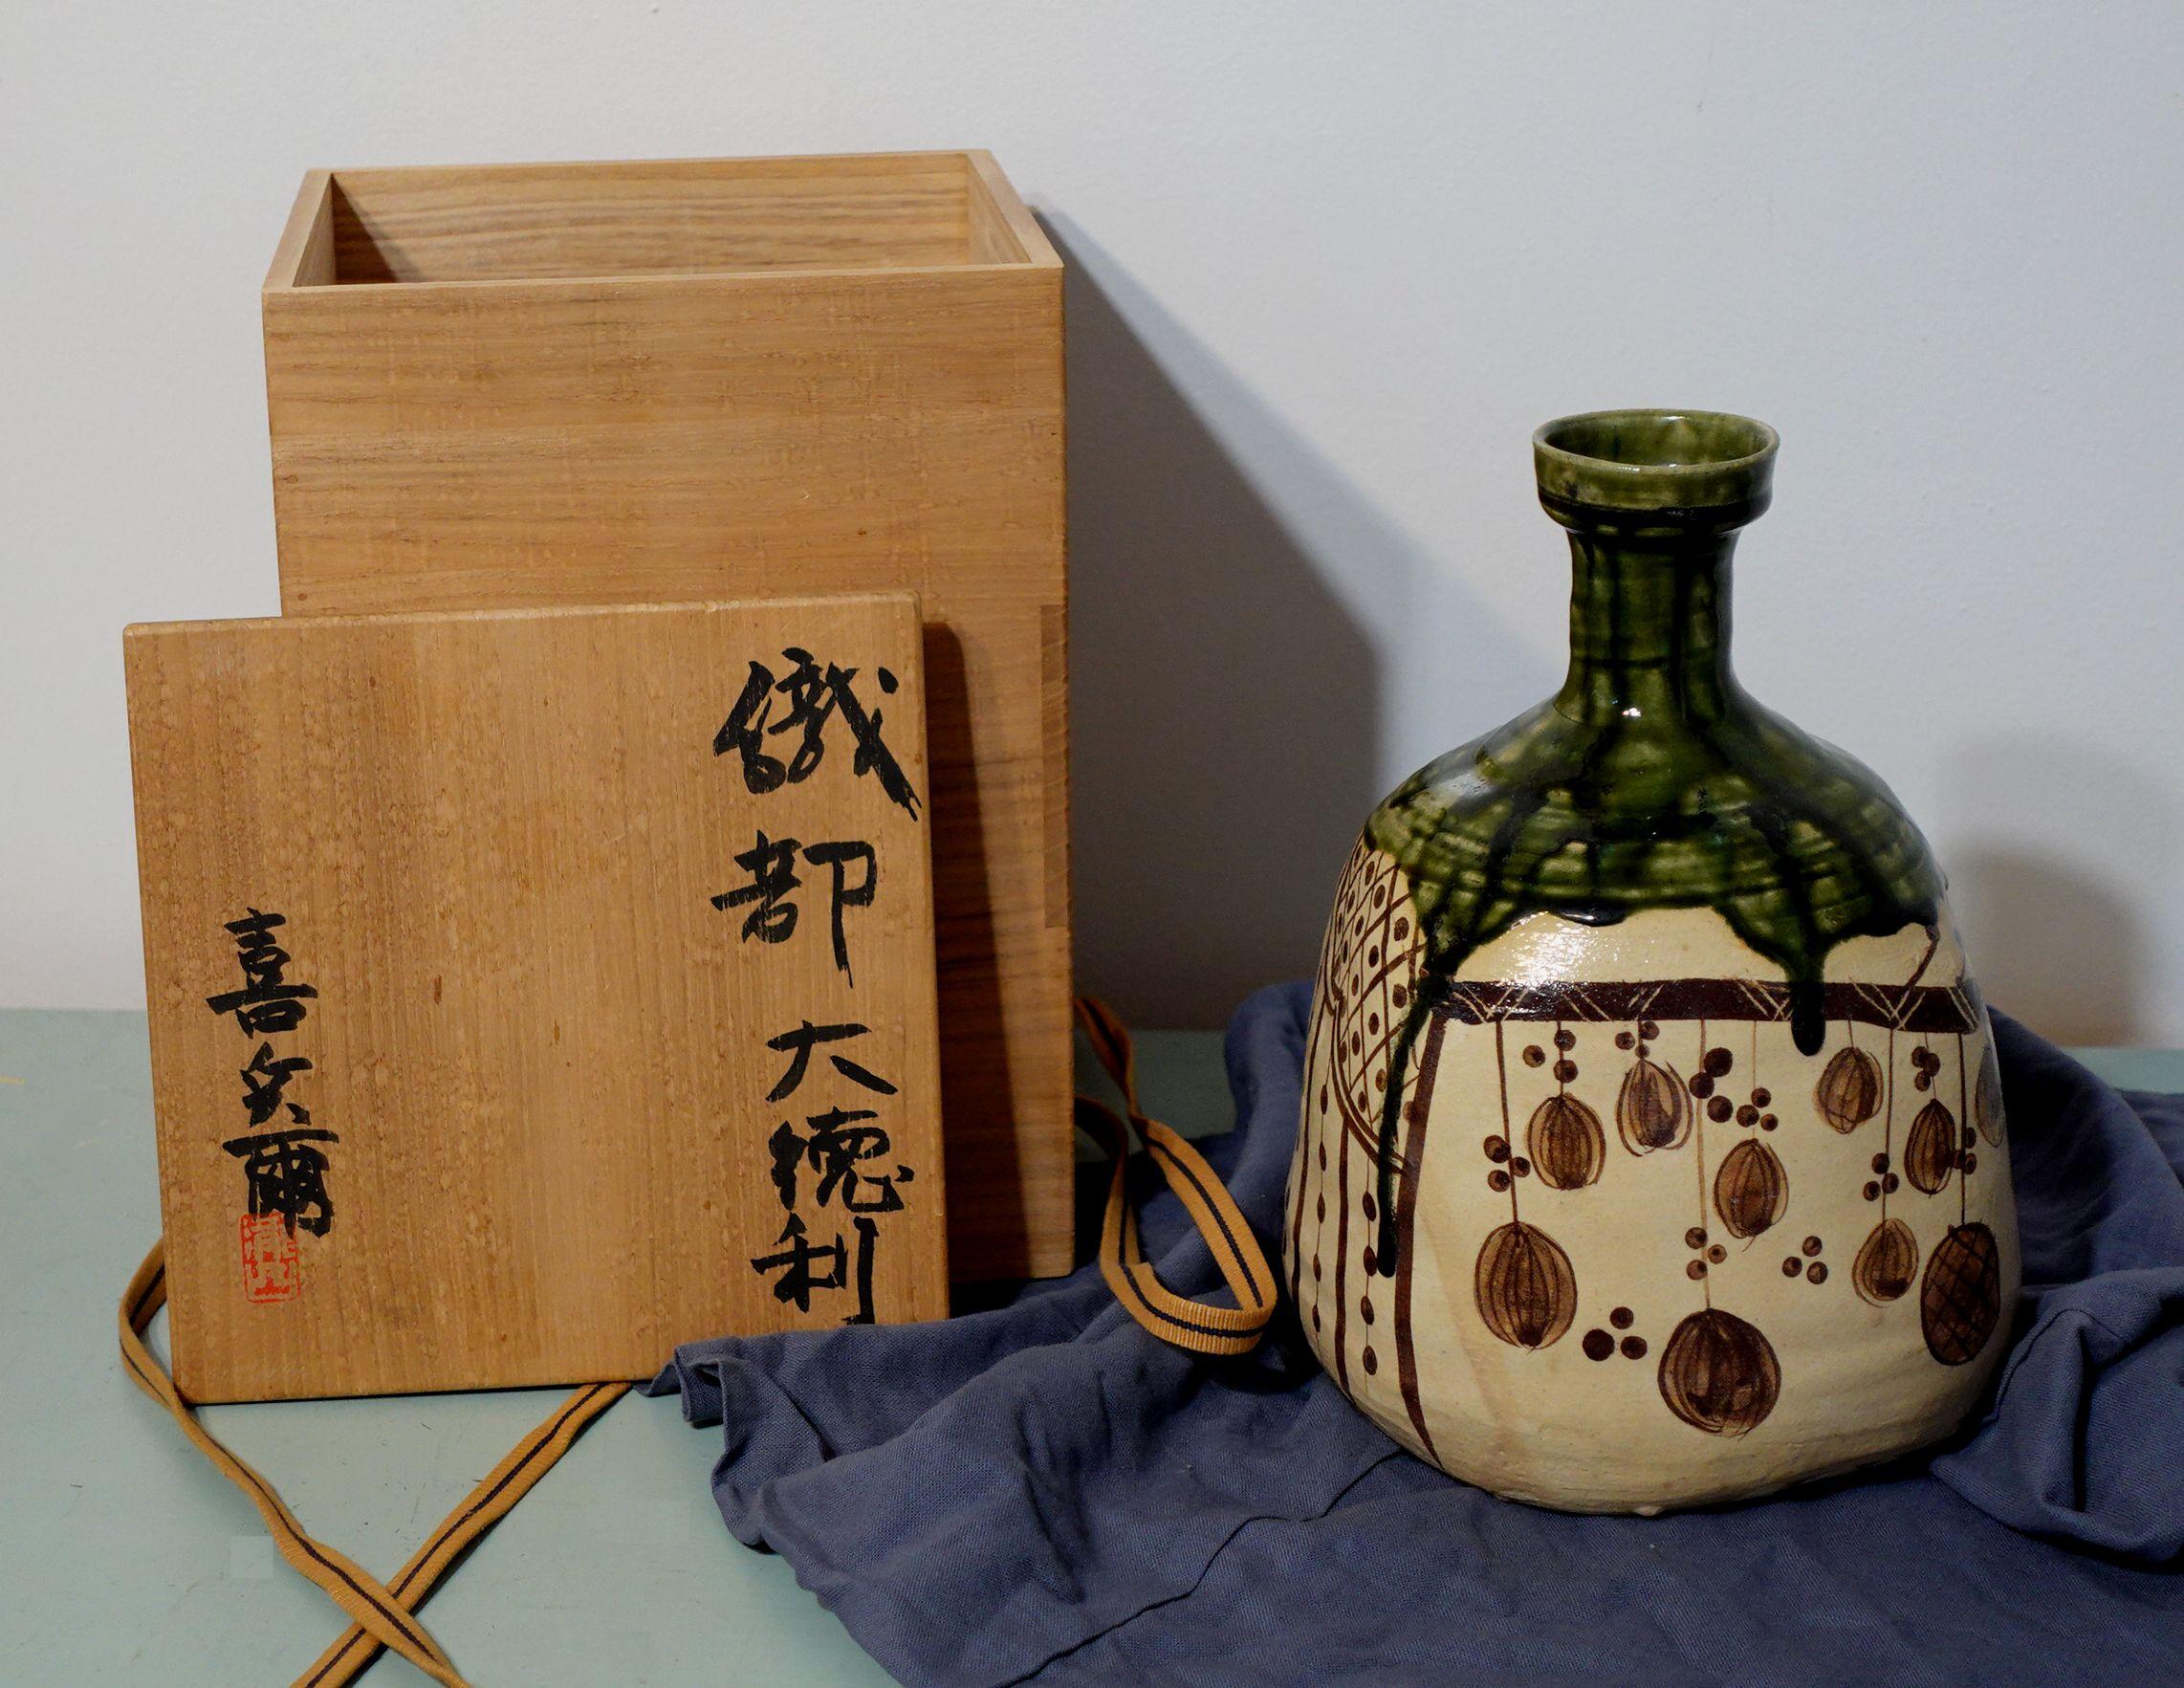 Japanese Oribe Stoneware/Sake vase w/ original box and cloth
This is a large Sake Bottle with a wide mouth vase and green glaze drip decorated with botanical designs including the original wood box and cloth

Dimensions
Vase 10 1/4